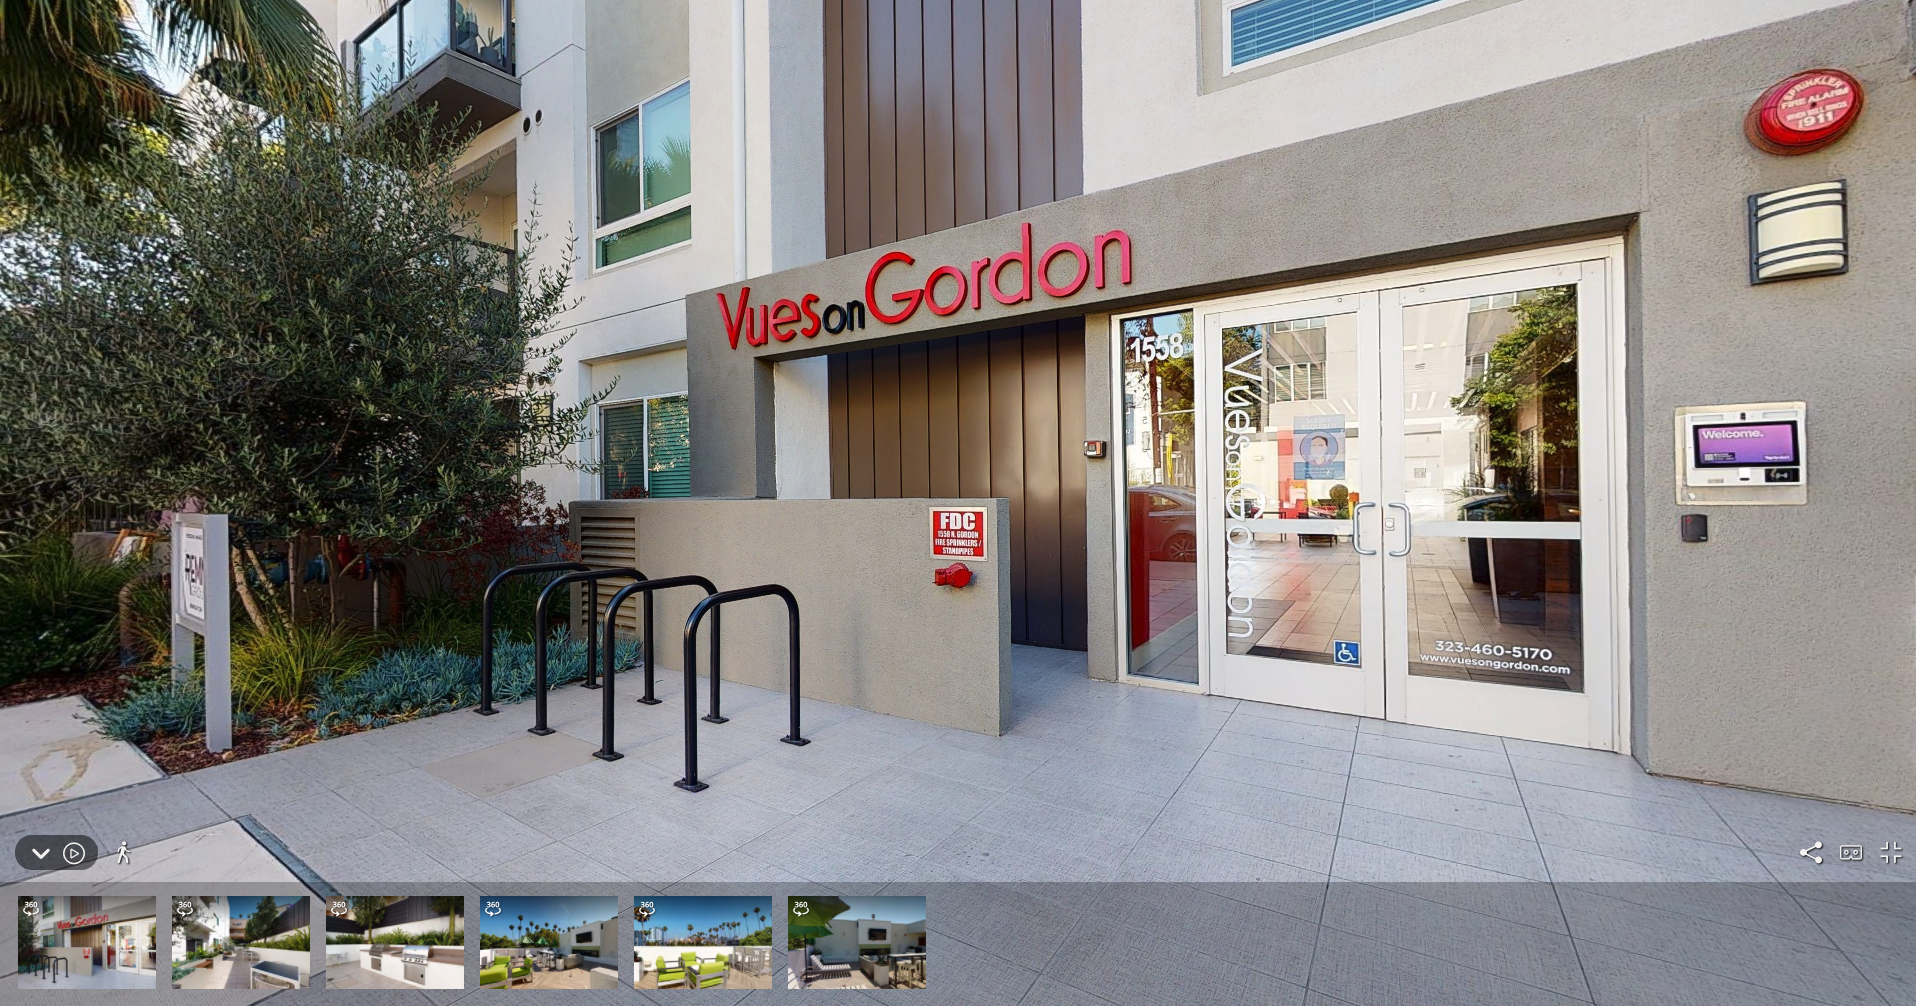 Virtual tour of amenities at Vues on Gordon Apartments in Hollywood California.